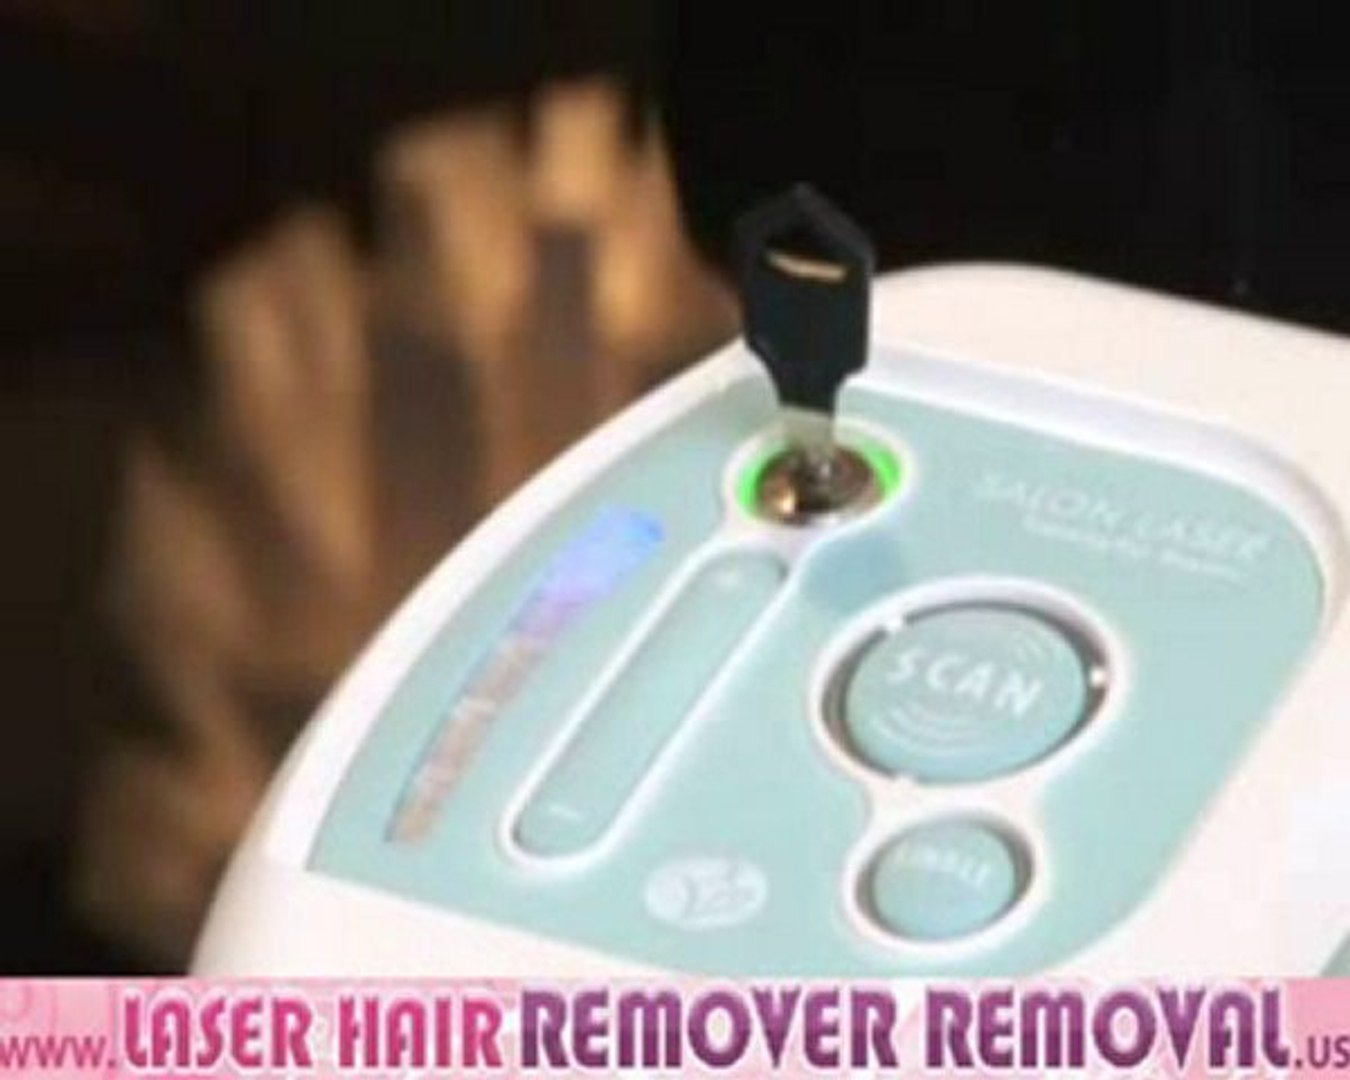 Permanent laser removal, Rio Scanning 2/2 - Dailymotion